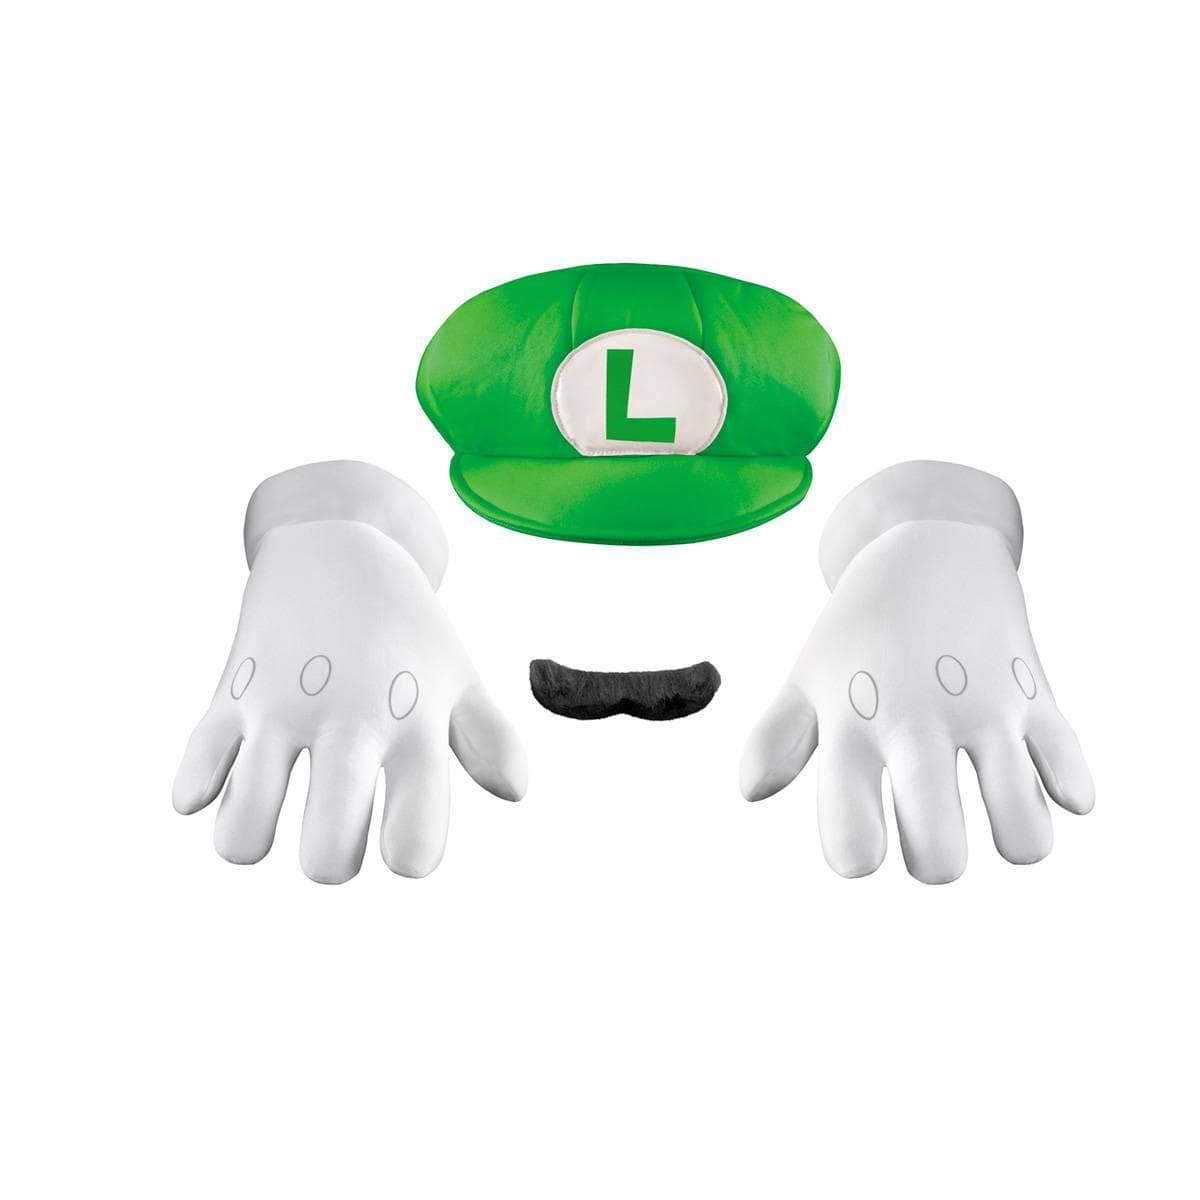 Buy Costume Accessories Luigi accessory kit for adults, Super Mario Bros. sold at Party Expert